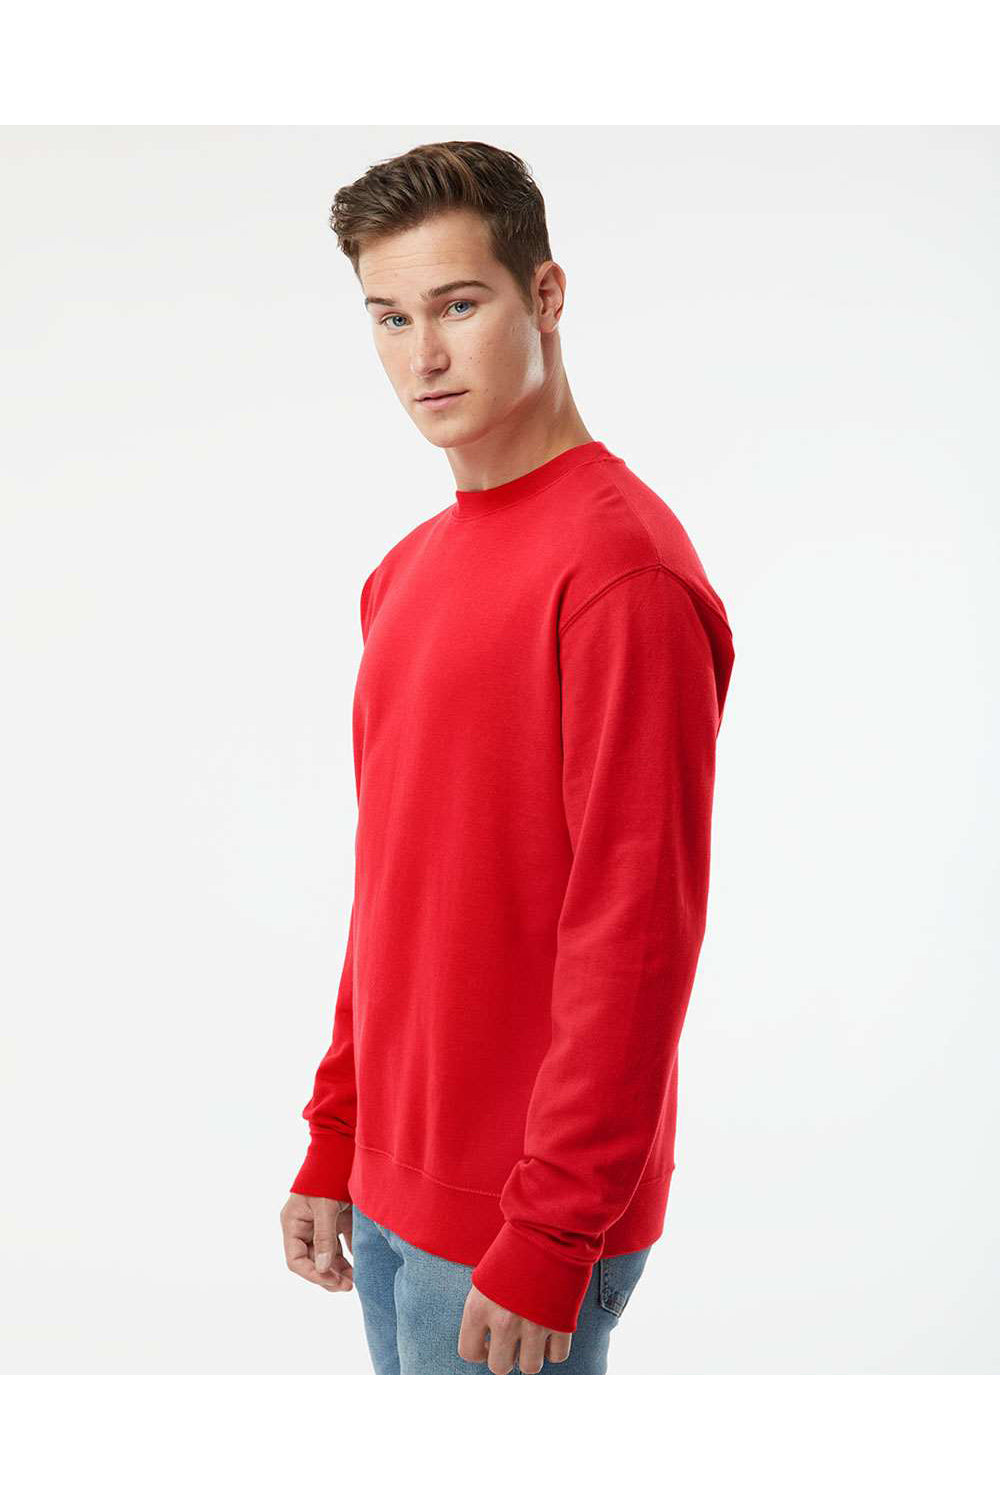 Independent Trading Co. SS3000 Mens Crewneck Sweatshirt Red Model Side